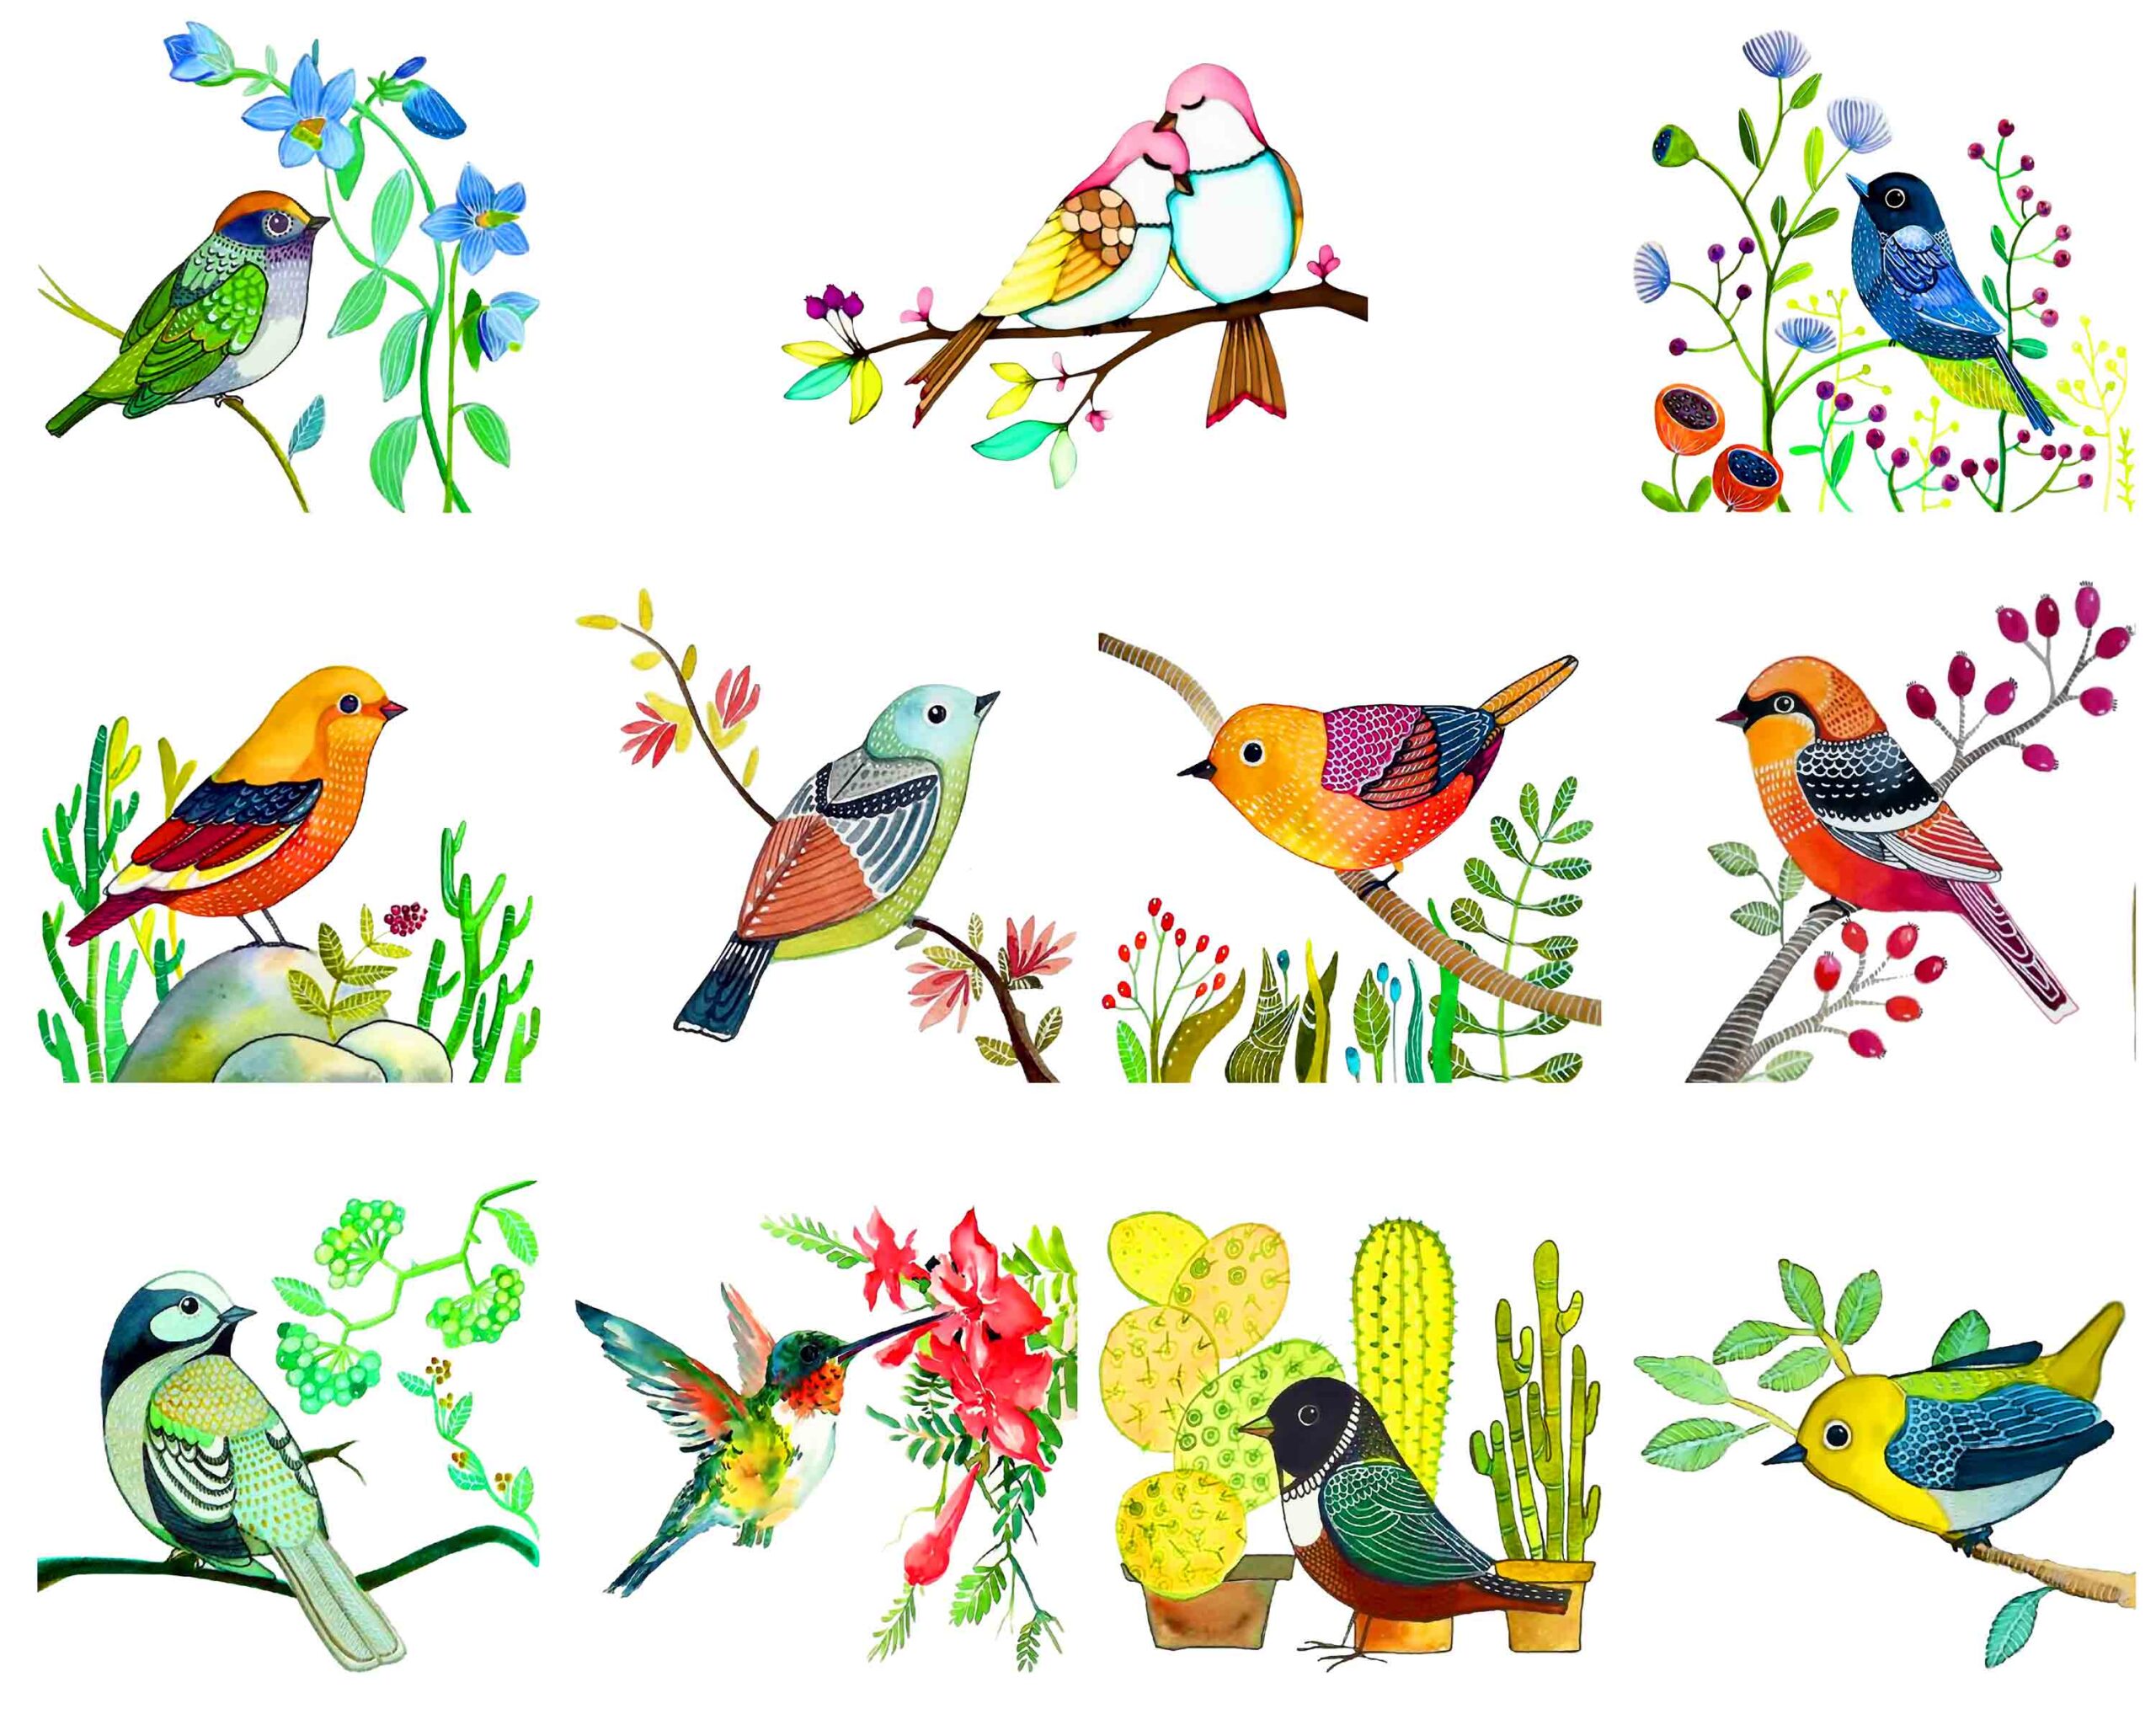 Birds & Branches Painting Art – Big Size Switchboard Sticker